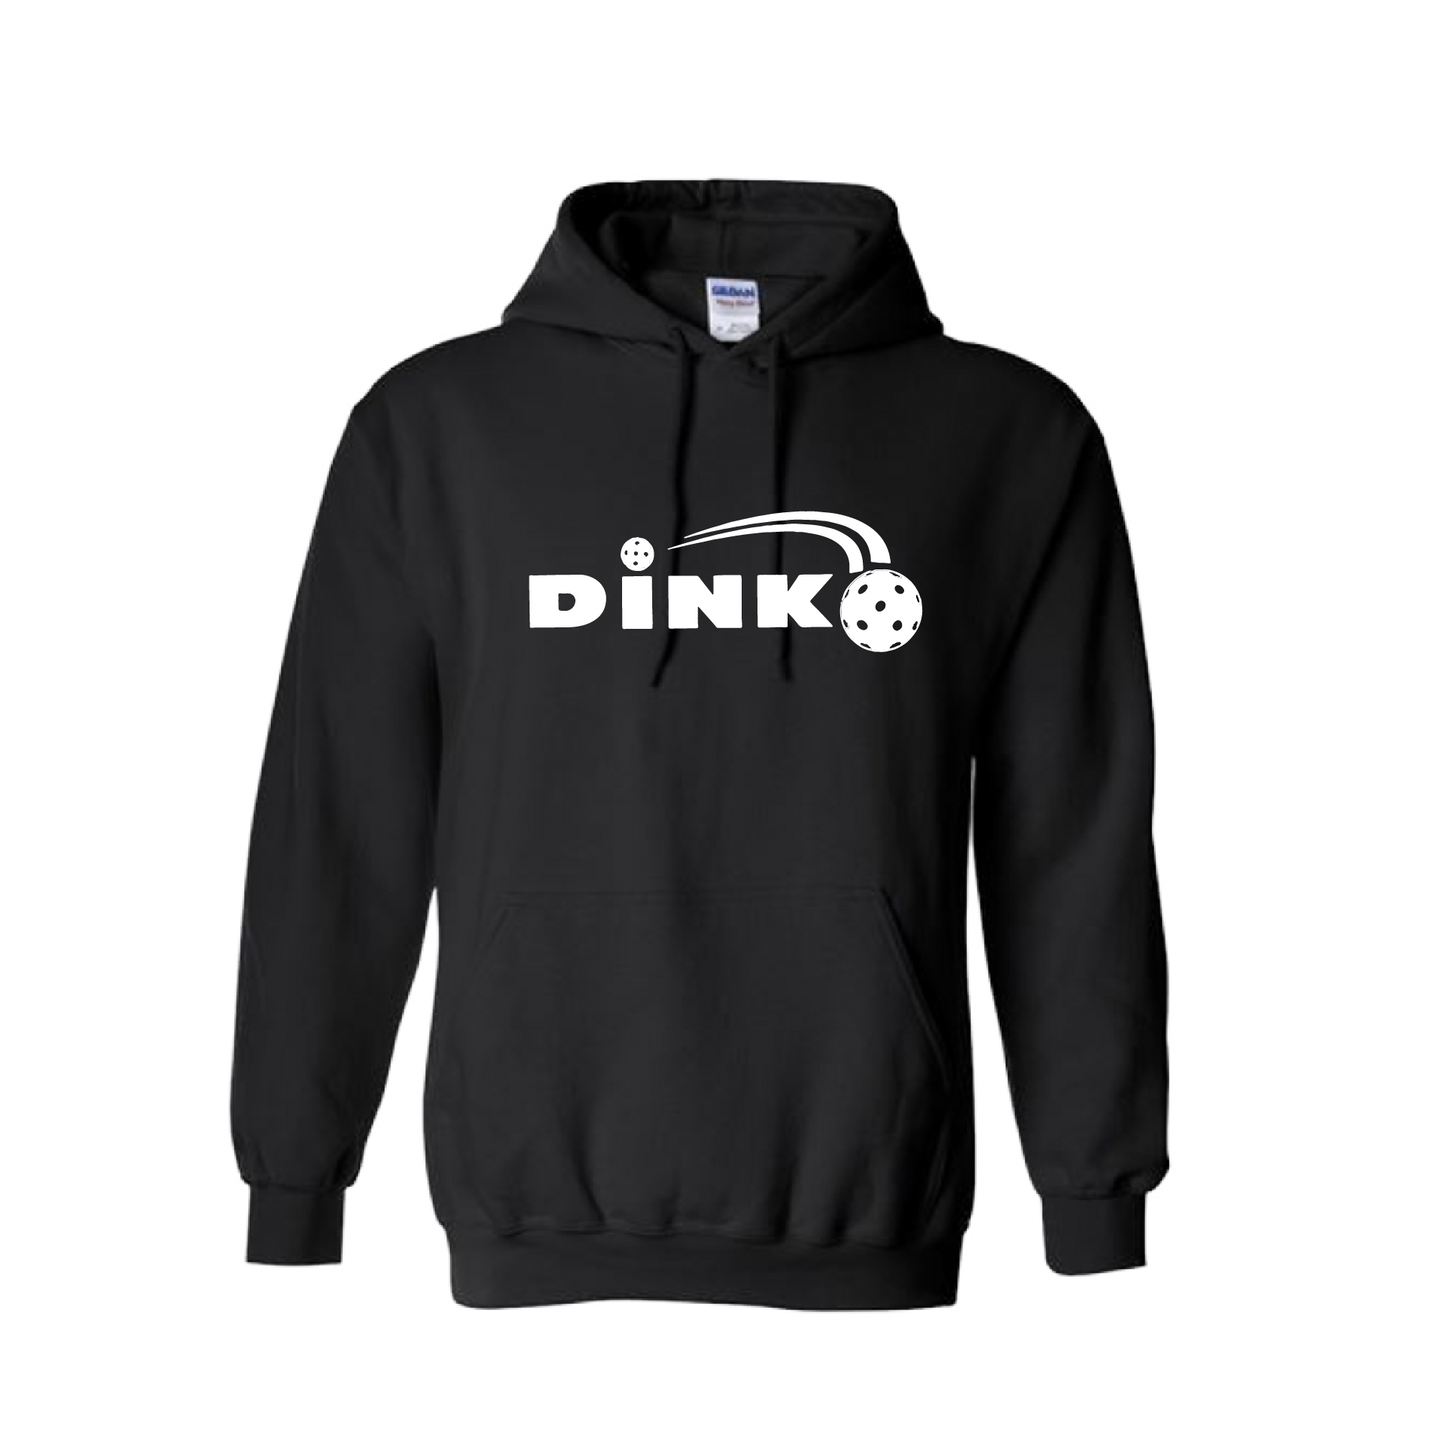 Pickeball Design: Dink  Unisex Hooded Sweatshirt: Moisture-wicking, double-lined hood, front pouch pocket.  This unisex hooded sweatshirt is ultra comfortable and soft. Stay warm on the Pickleball courts while being that hit with this one of kind design.